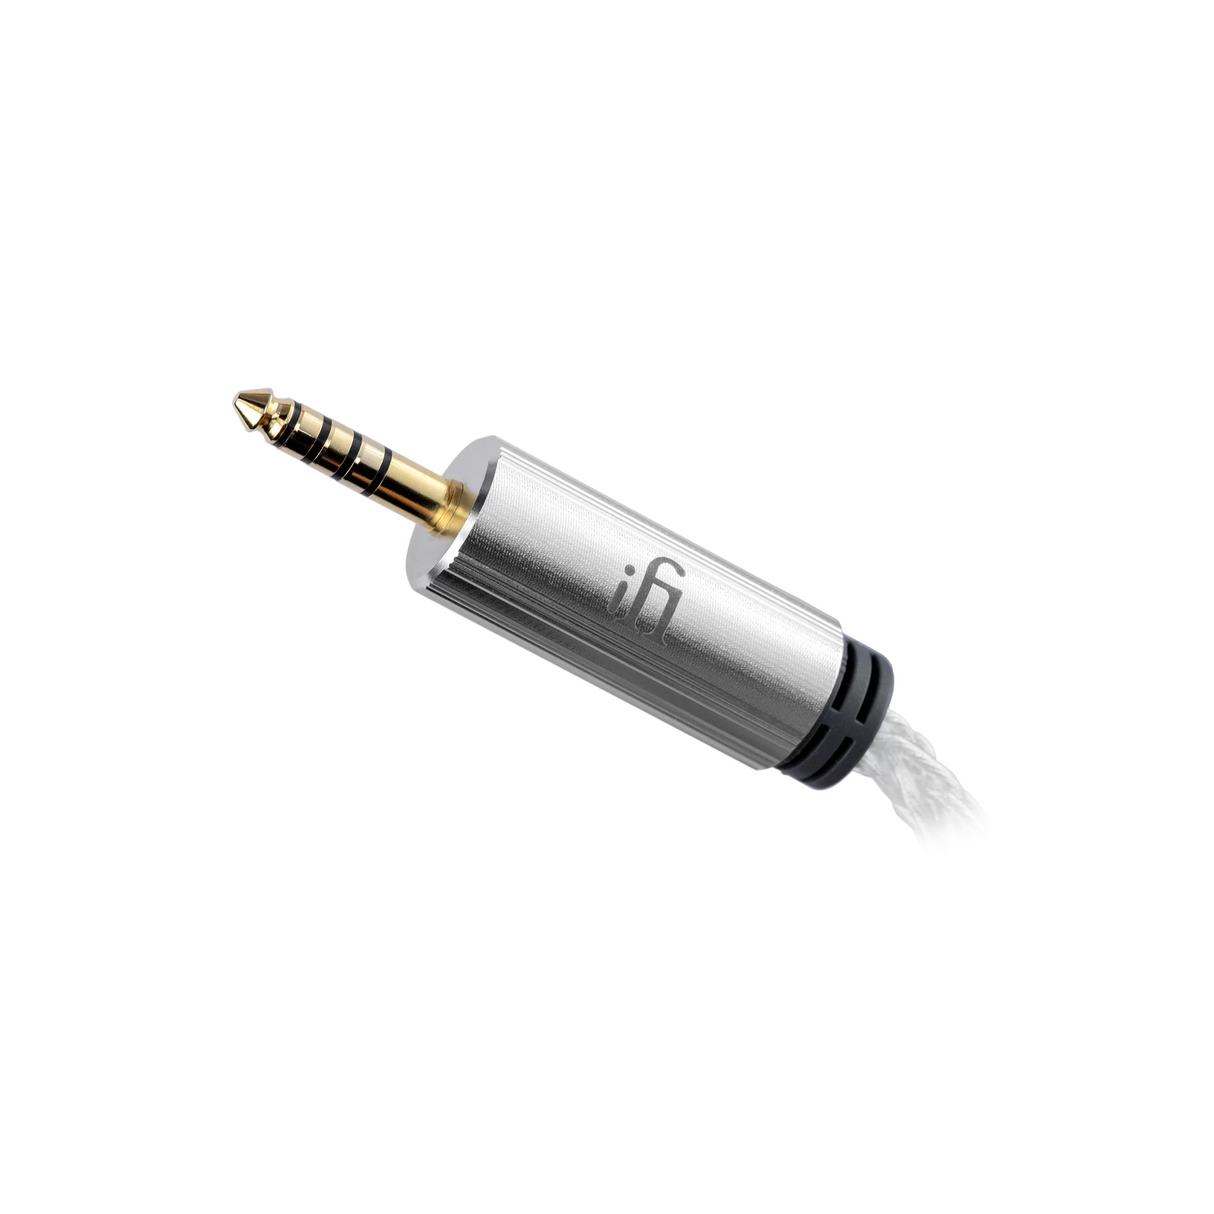 iFi 4.4mm to XLR Cable (4.4mm to twin XLR 1M)